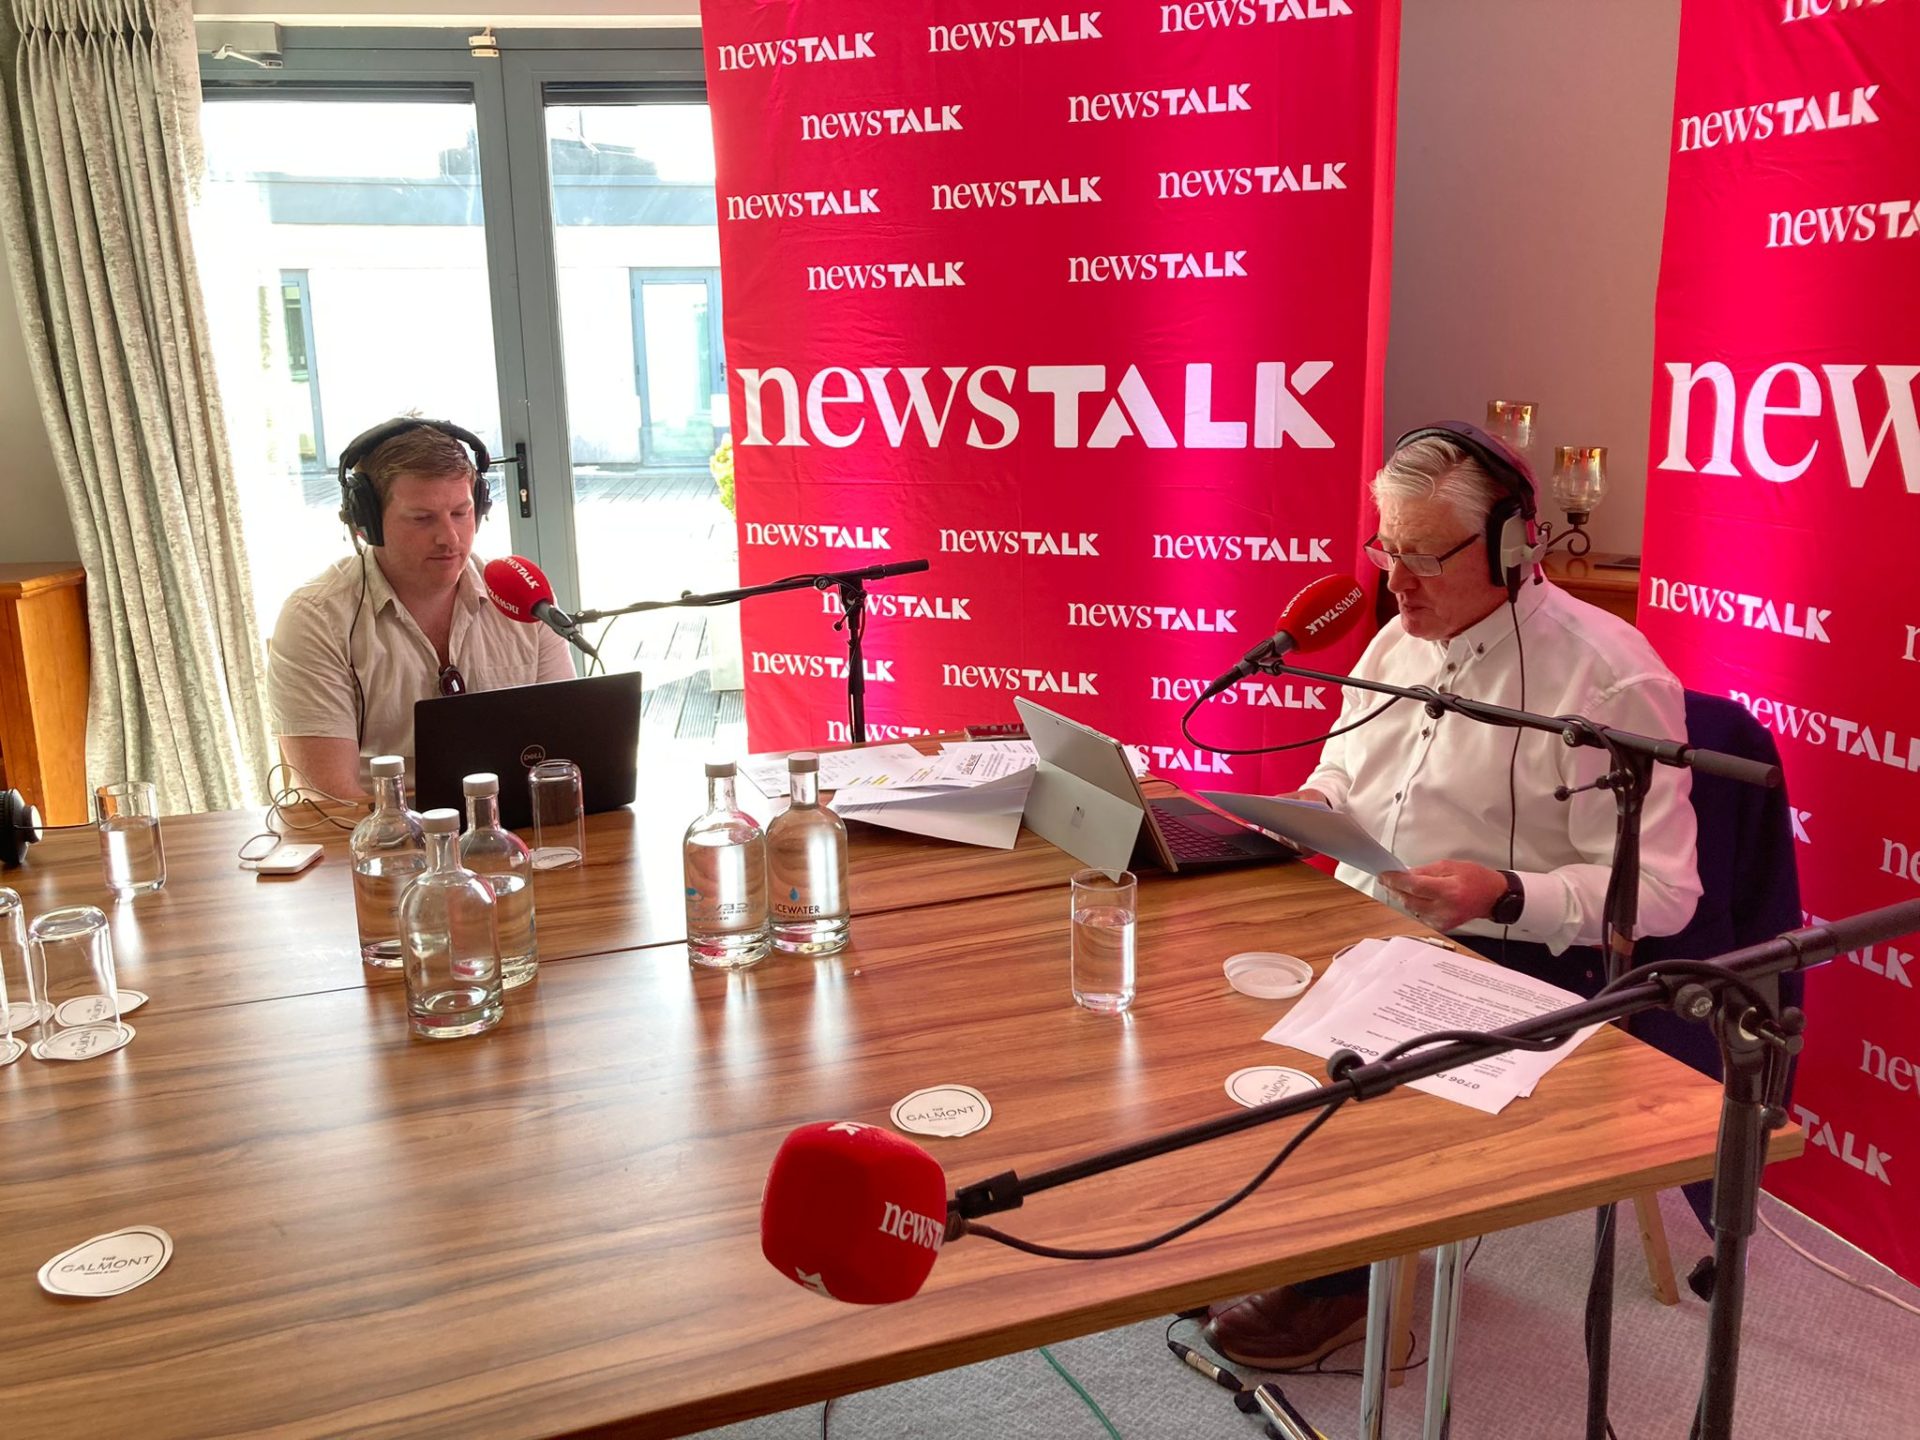 Josh Crosbie on The Pat Kenny Show for his report on Galway traffic